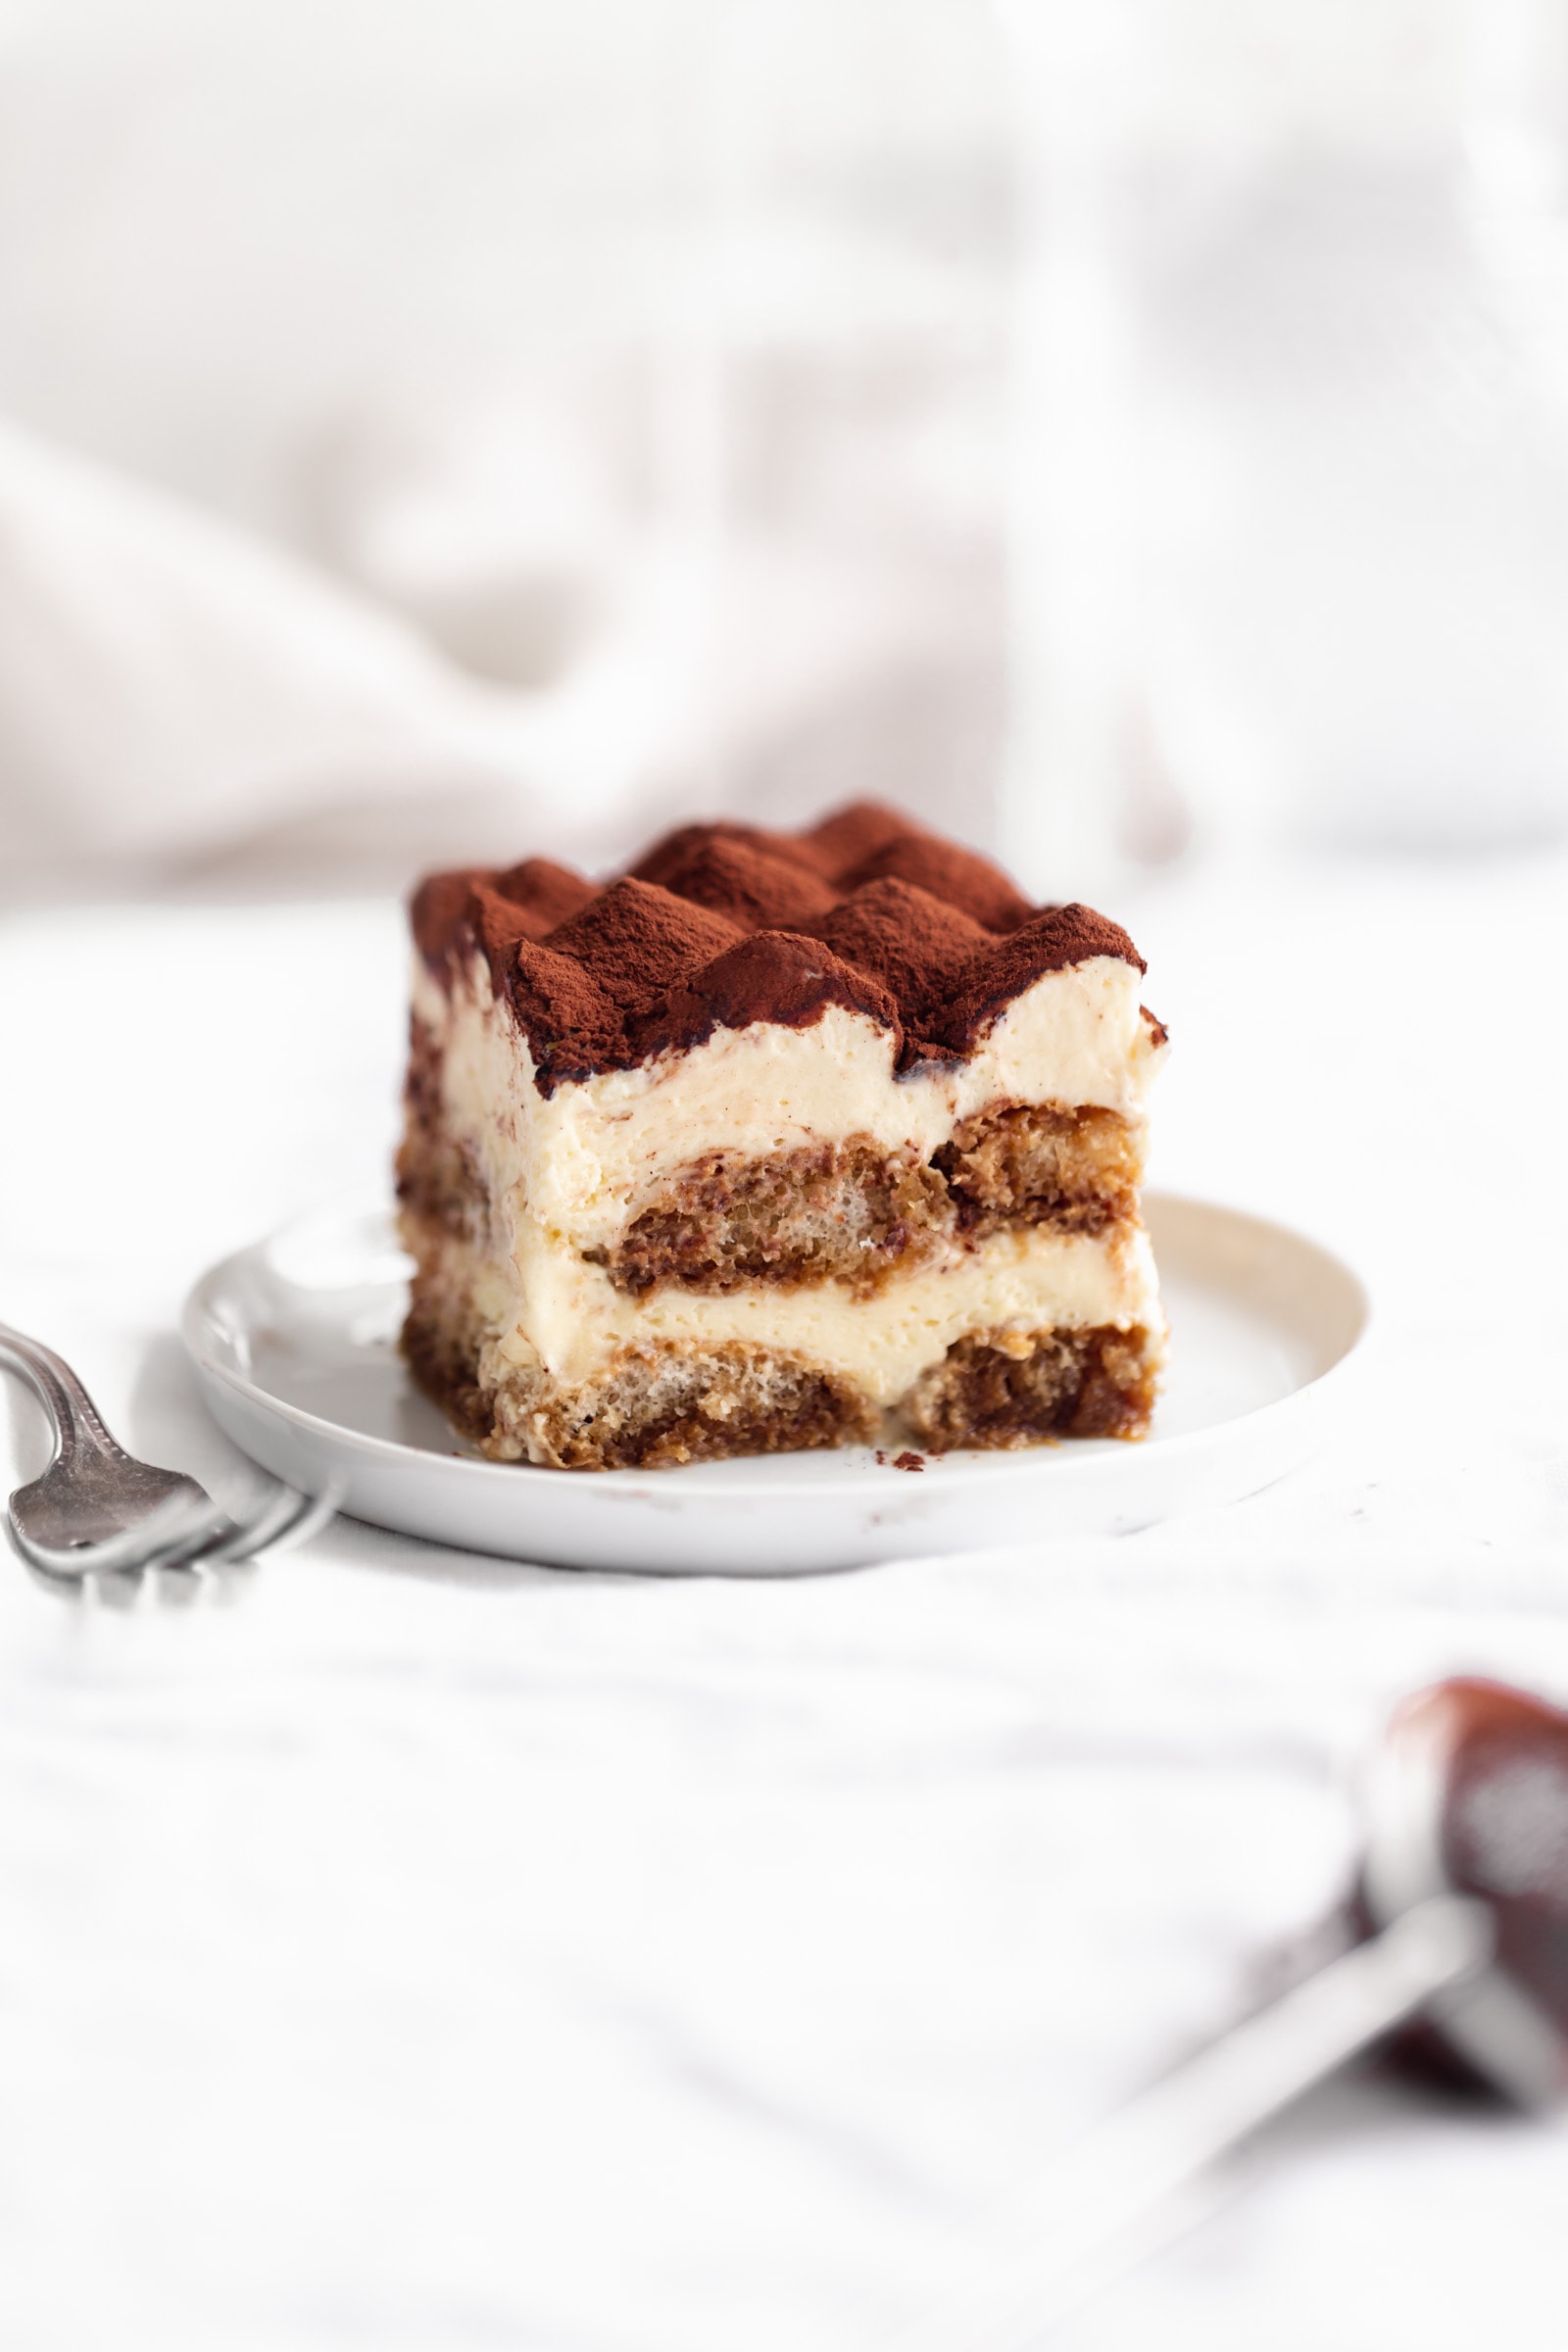 Tiramisu - Classically prepared but with cooked egg yolks instead